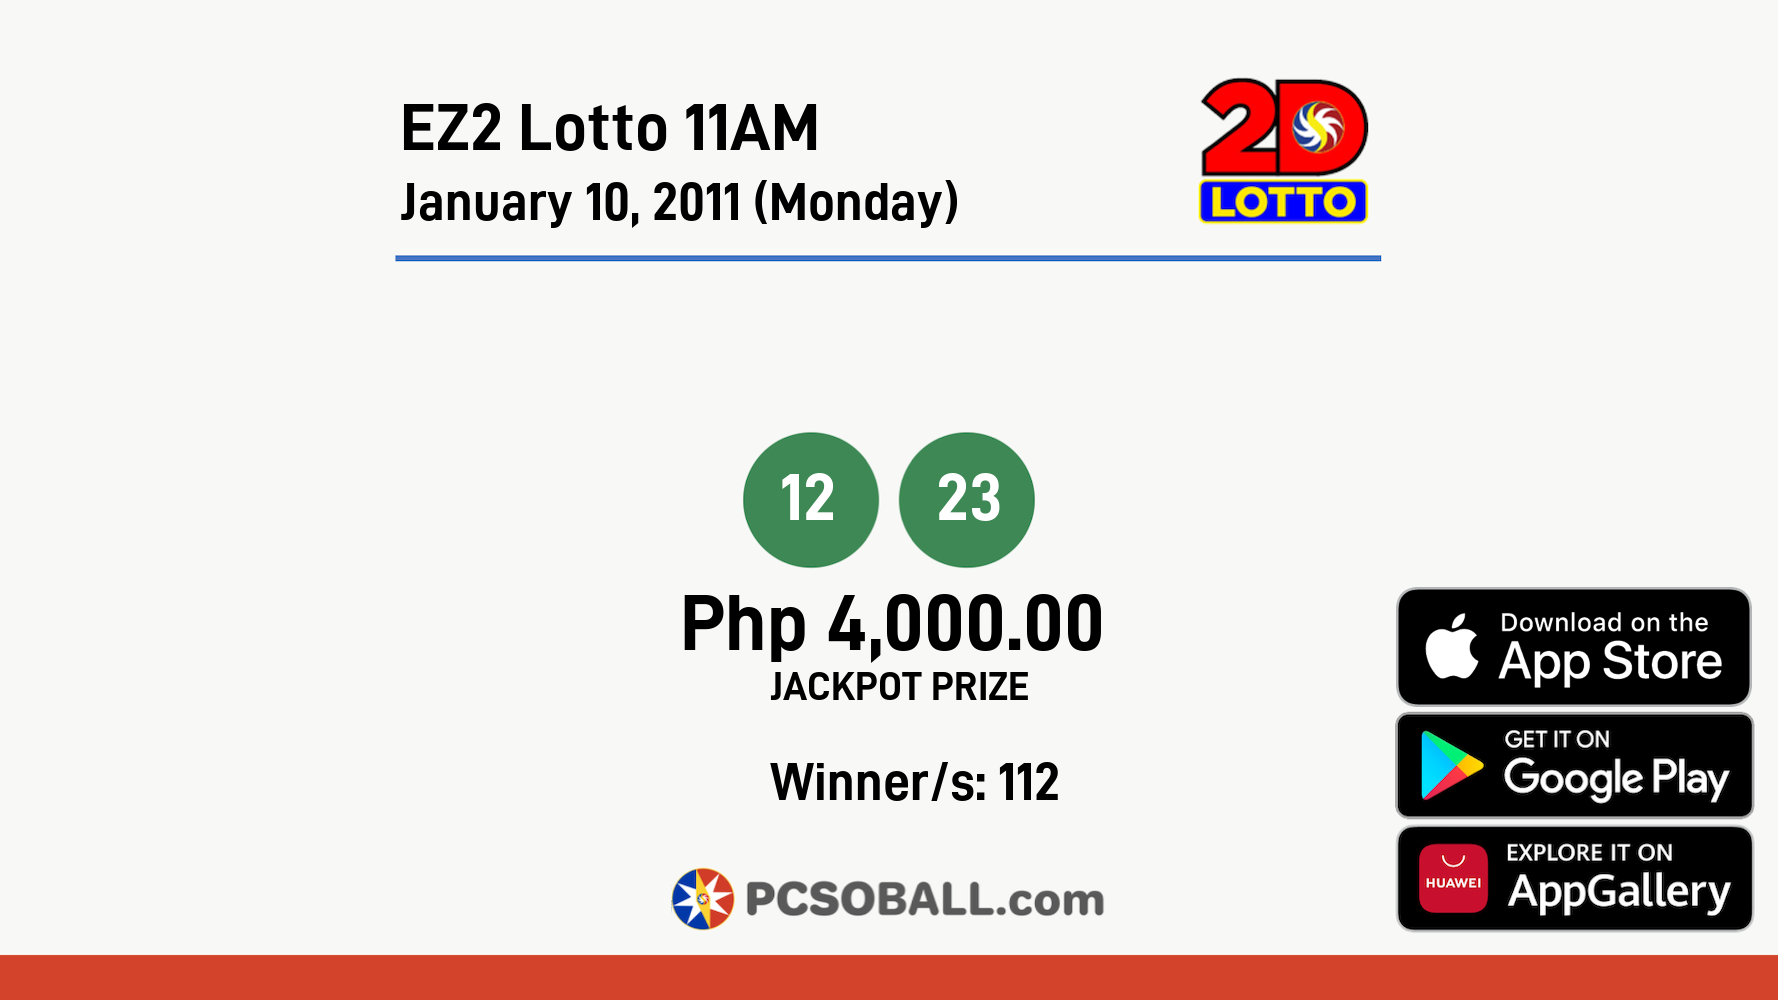 EZ2 Lotto 11AM January 10, 2011 (Monday) Result